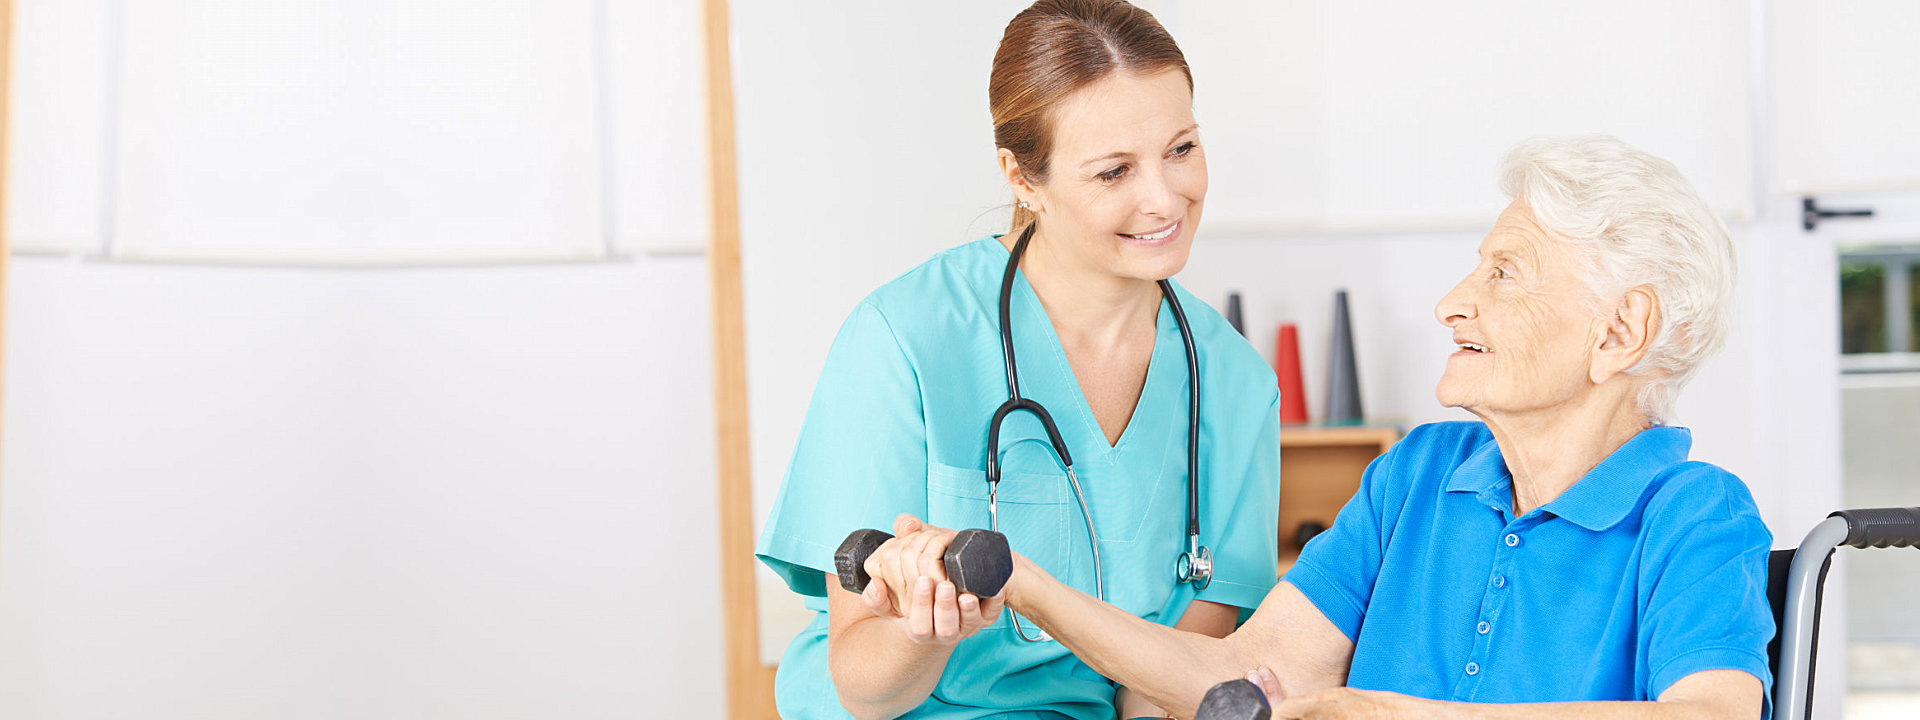 caregiver assisting  elderly patient in lifting weights